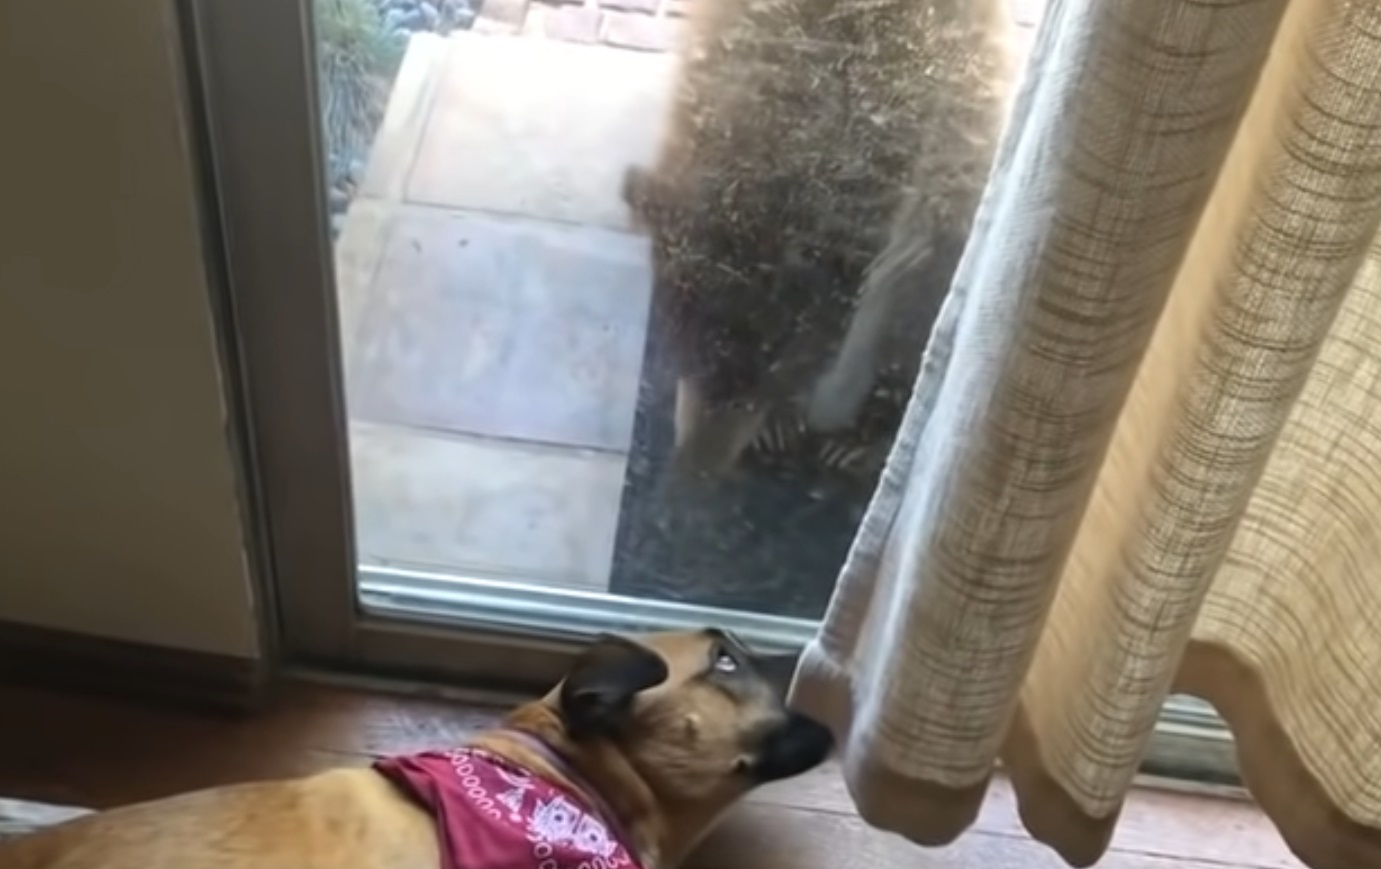 Dog Wakes Up To Bear Next To The Window